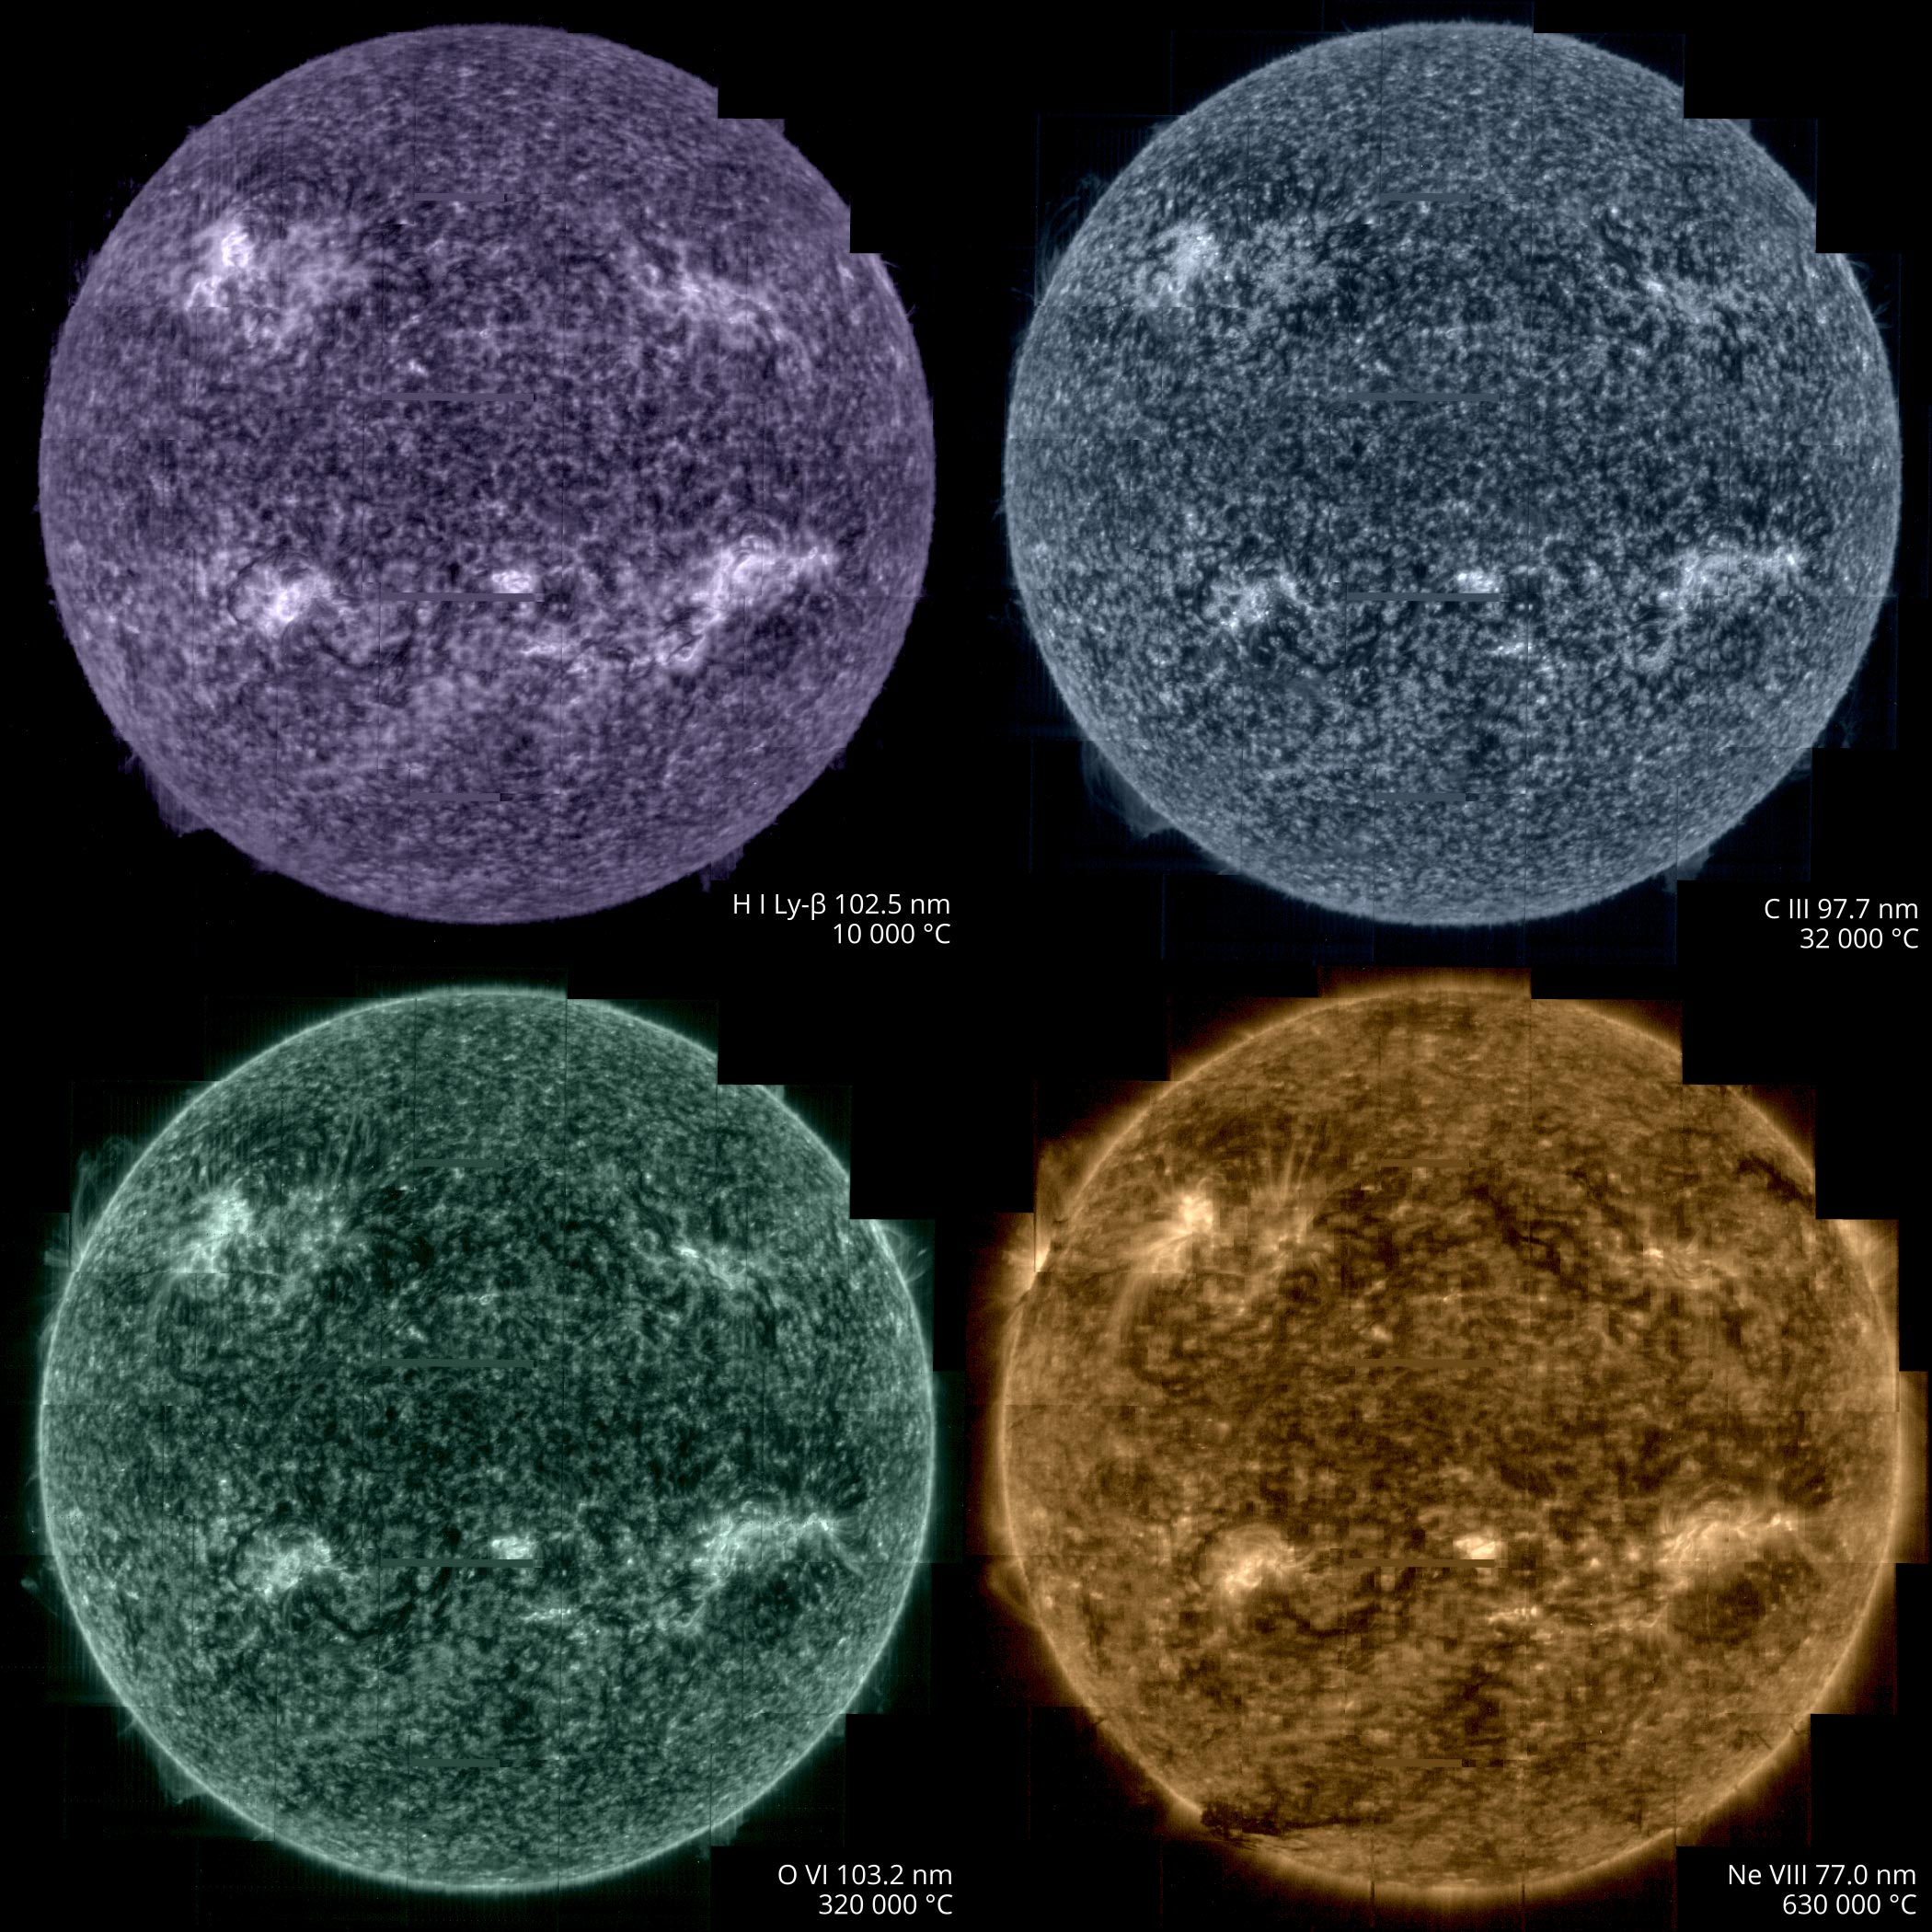 Most detailed ever image of Sun's explosive lower atmosphere